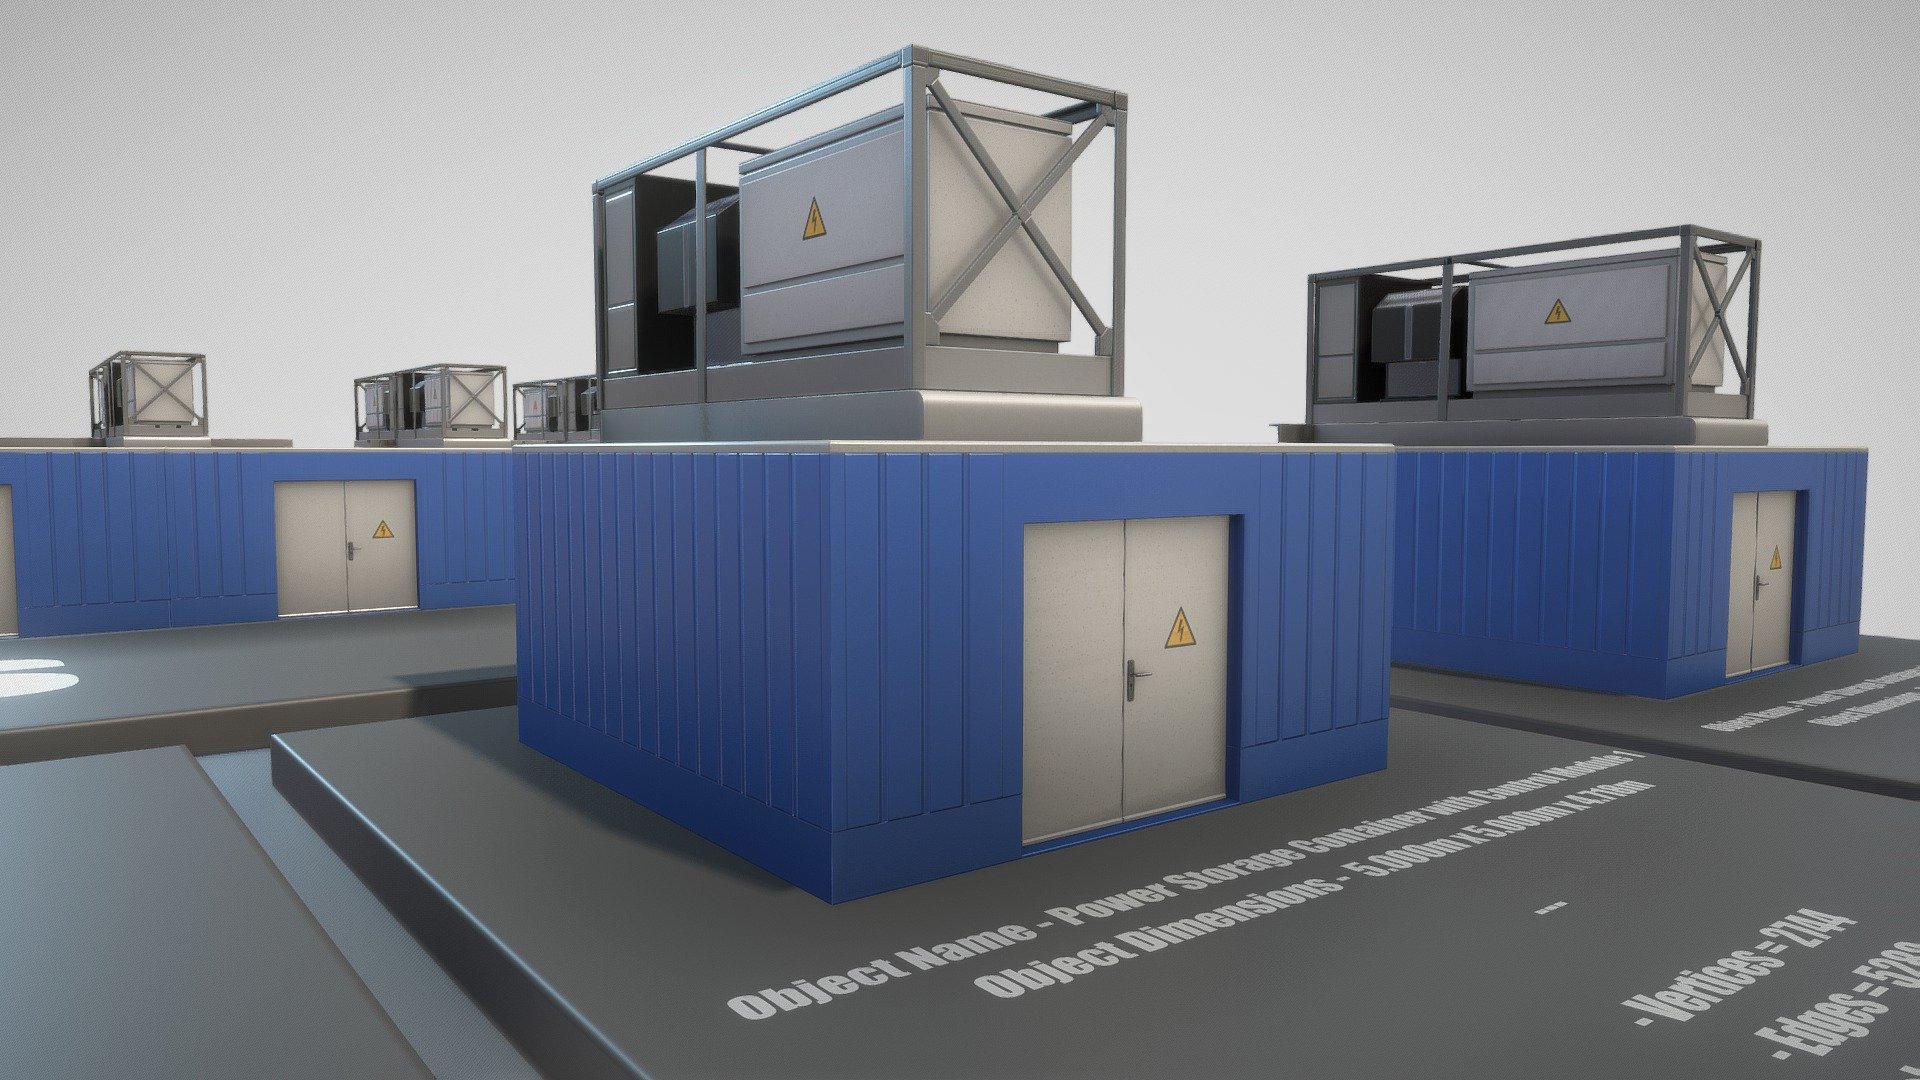 Power storage containers version 2 in blue.

Parts:




Object Name - Power Storage Container Control Module 

Object Dimensions -  4.847m x 1.740m x 2.244m

Vertices = 2132

Polygons = 1967






Object Name - Power Storage Container Control Module 2 

Object Dimensions -  4.847m x 5.000m x 2.244m

Vertices = 2156

Polygons = 1983 






Object Name - Power Storage Container with Control Module 2 

Object Dimensions -  5.000m x 5.000m x 4.718m

Vertices = 2768

Polygons = 2606






Object Name - Power Storage Container 

Object Dimensions -  5.000m x 5.000m x 2.495m

Vertices = 612

Polygons = 623






Object Name - Power Storage Container with Control Module 1  

Object Dimensions -  5.000m x 5.000m x 4.718m

Vertices = 2744

Polygons = 2590






Object Name - Power Storage Container Door 

0.090m x 1.964m x 1.993m

Vertices = 518

Polygons = 522



3D modeled and textured by 3DHaupt in Blender 2.93 3d model